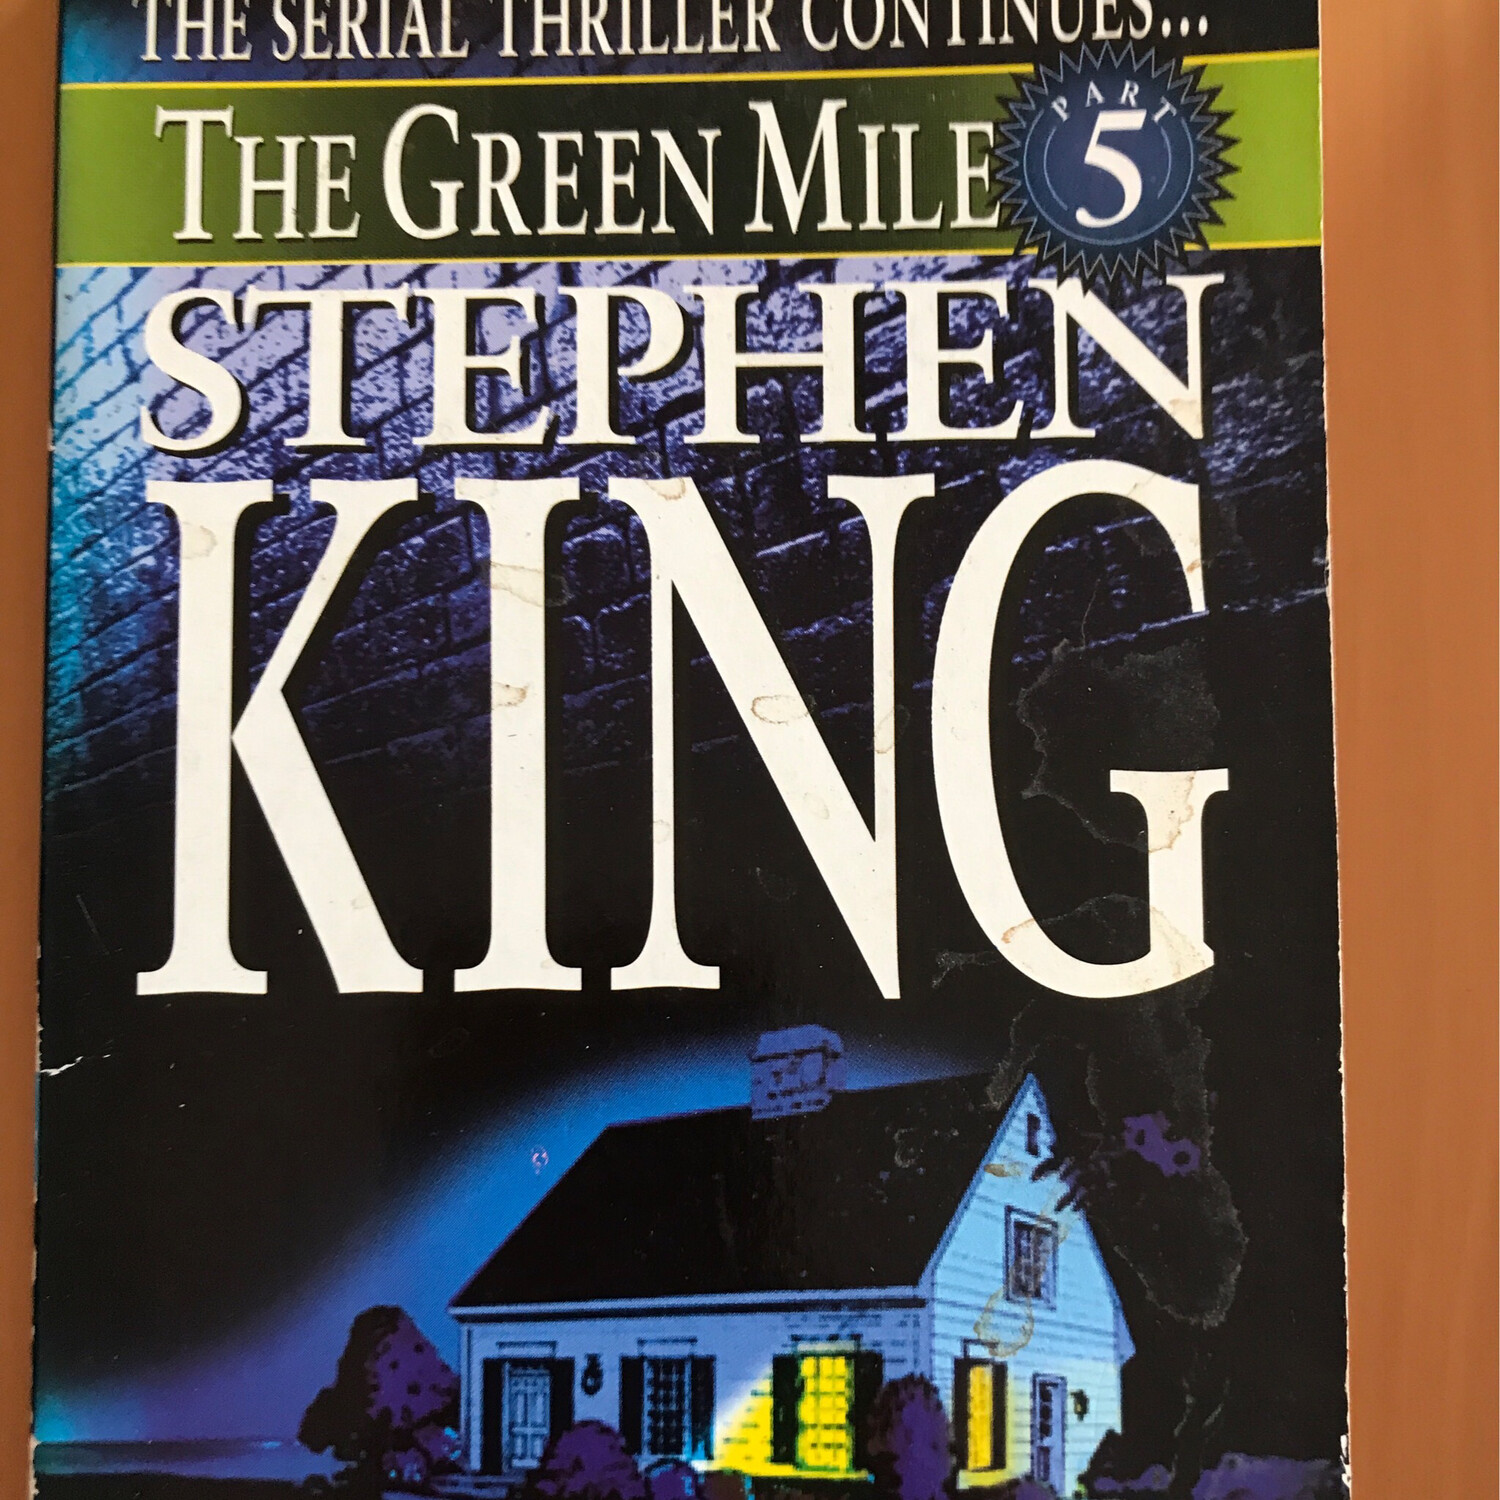 The Green Mile Part Five, Stephen King